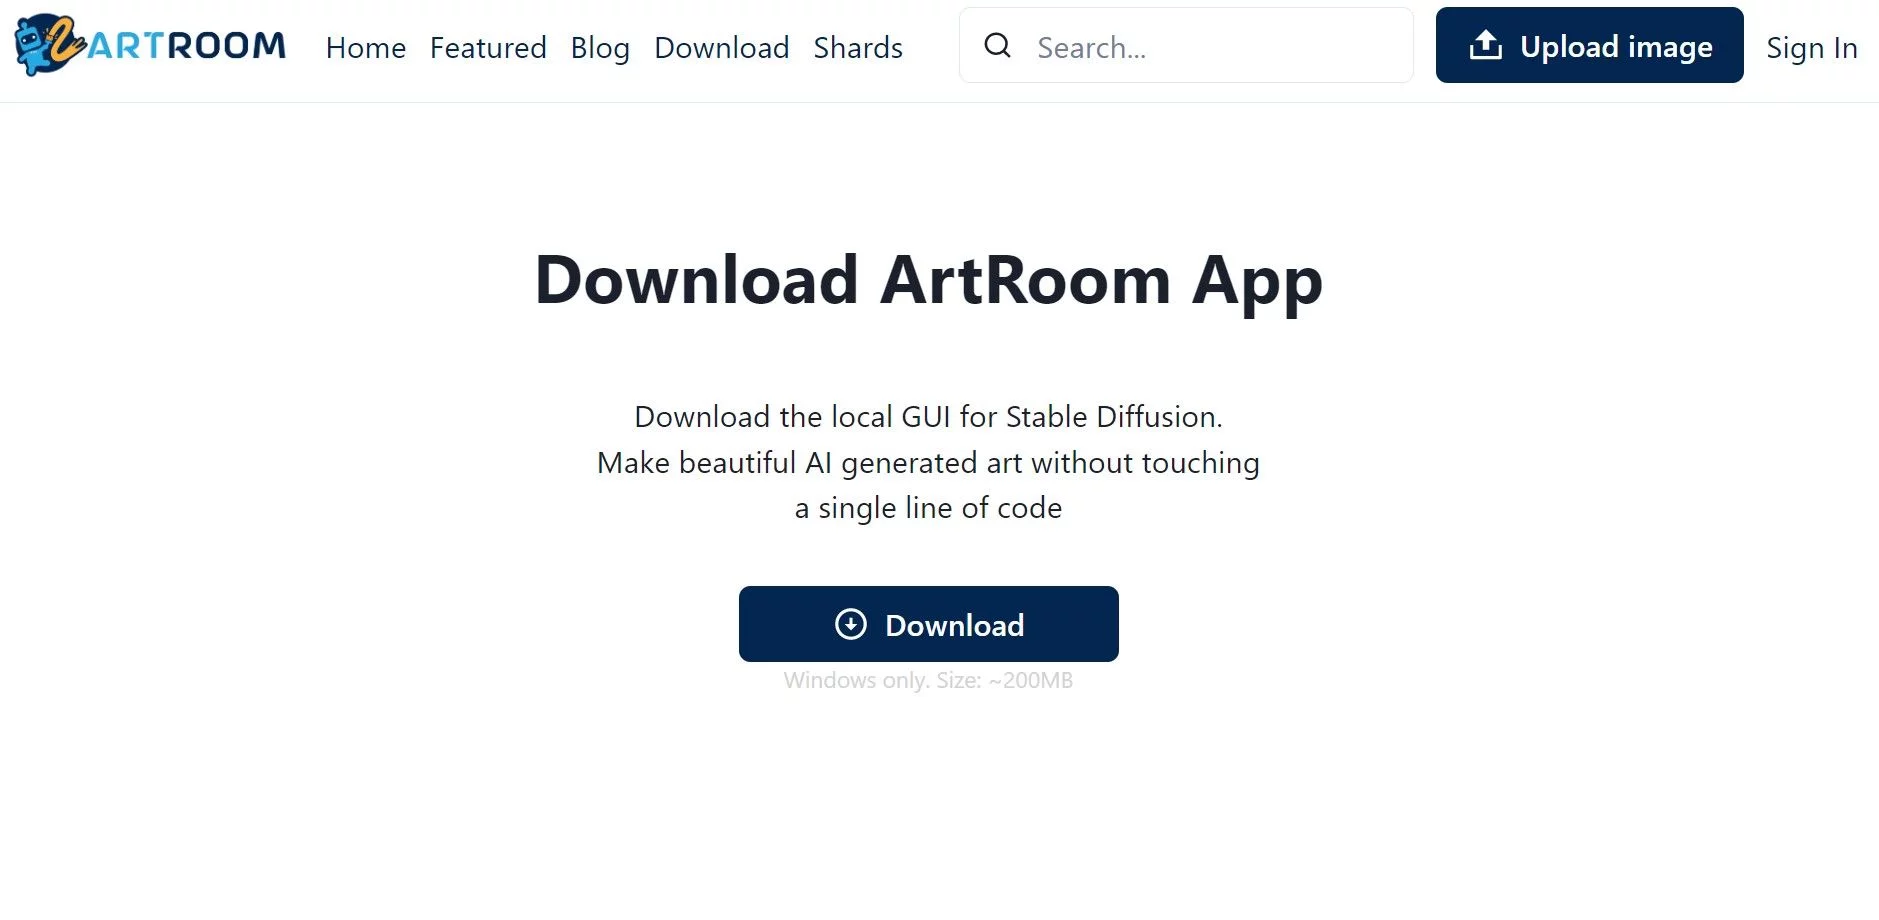  Download GUI to make AI art without coding.